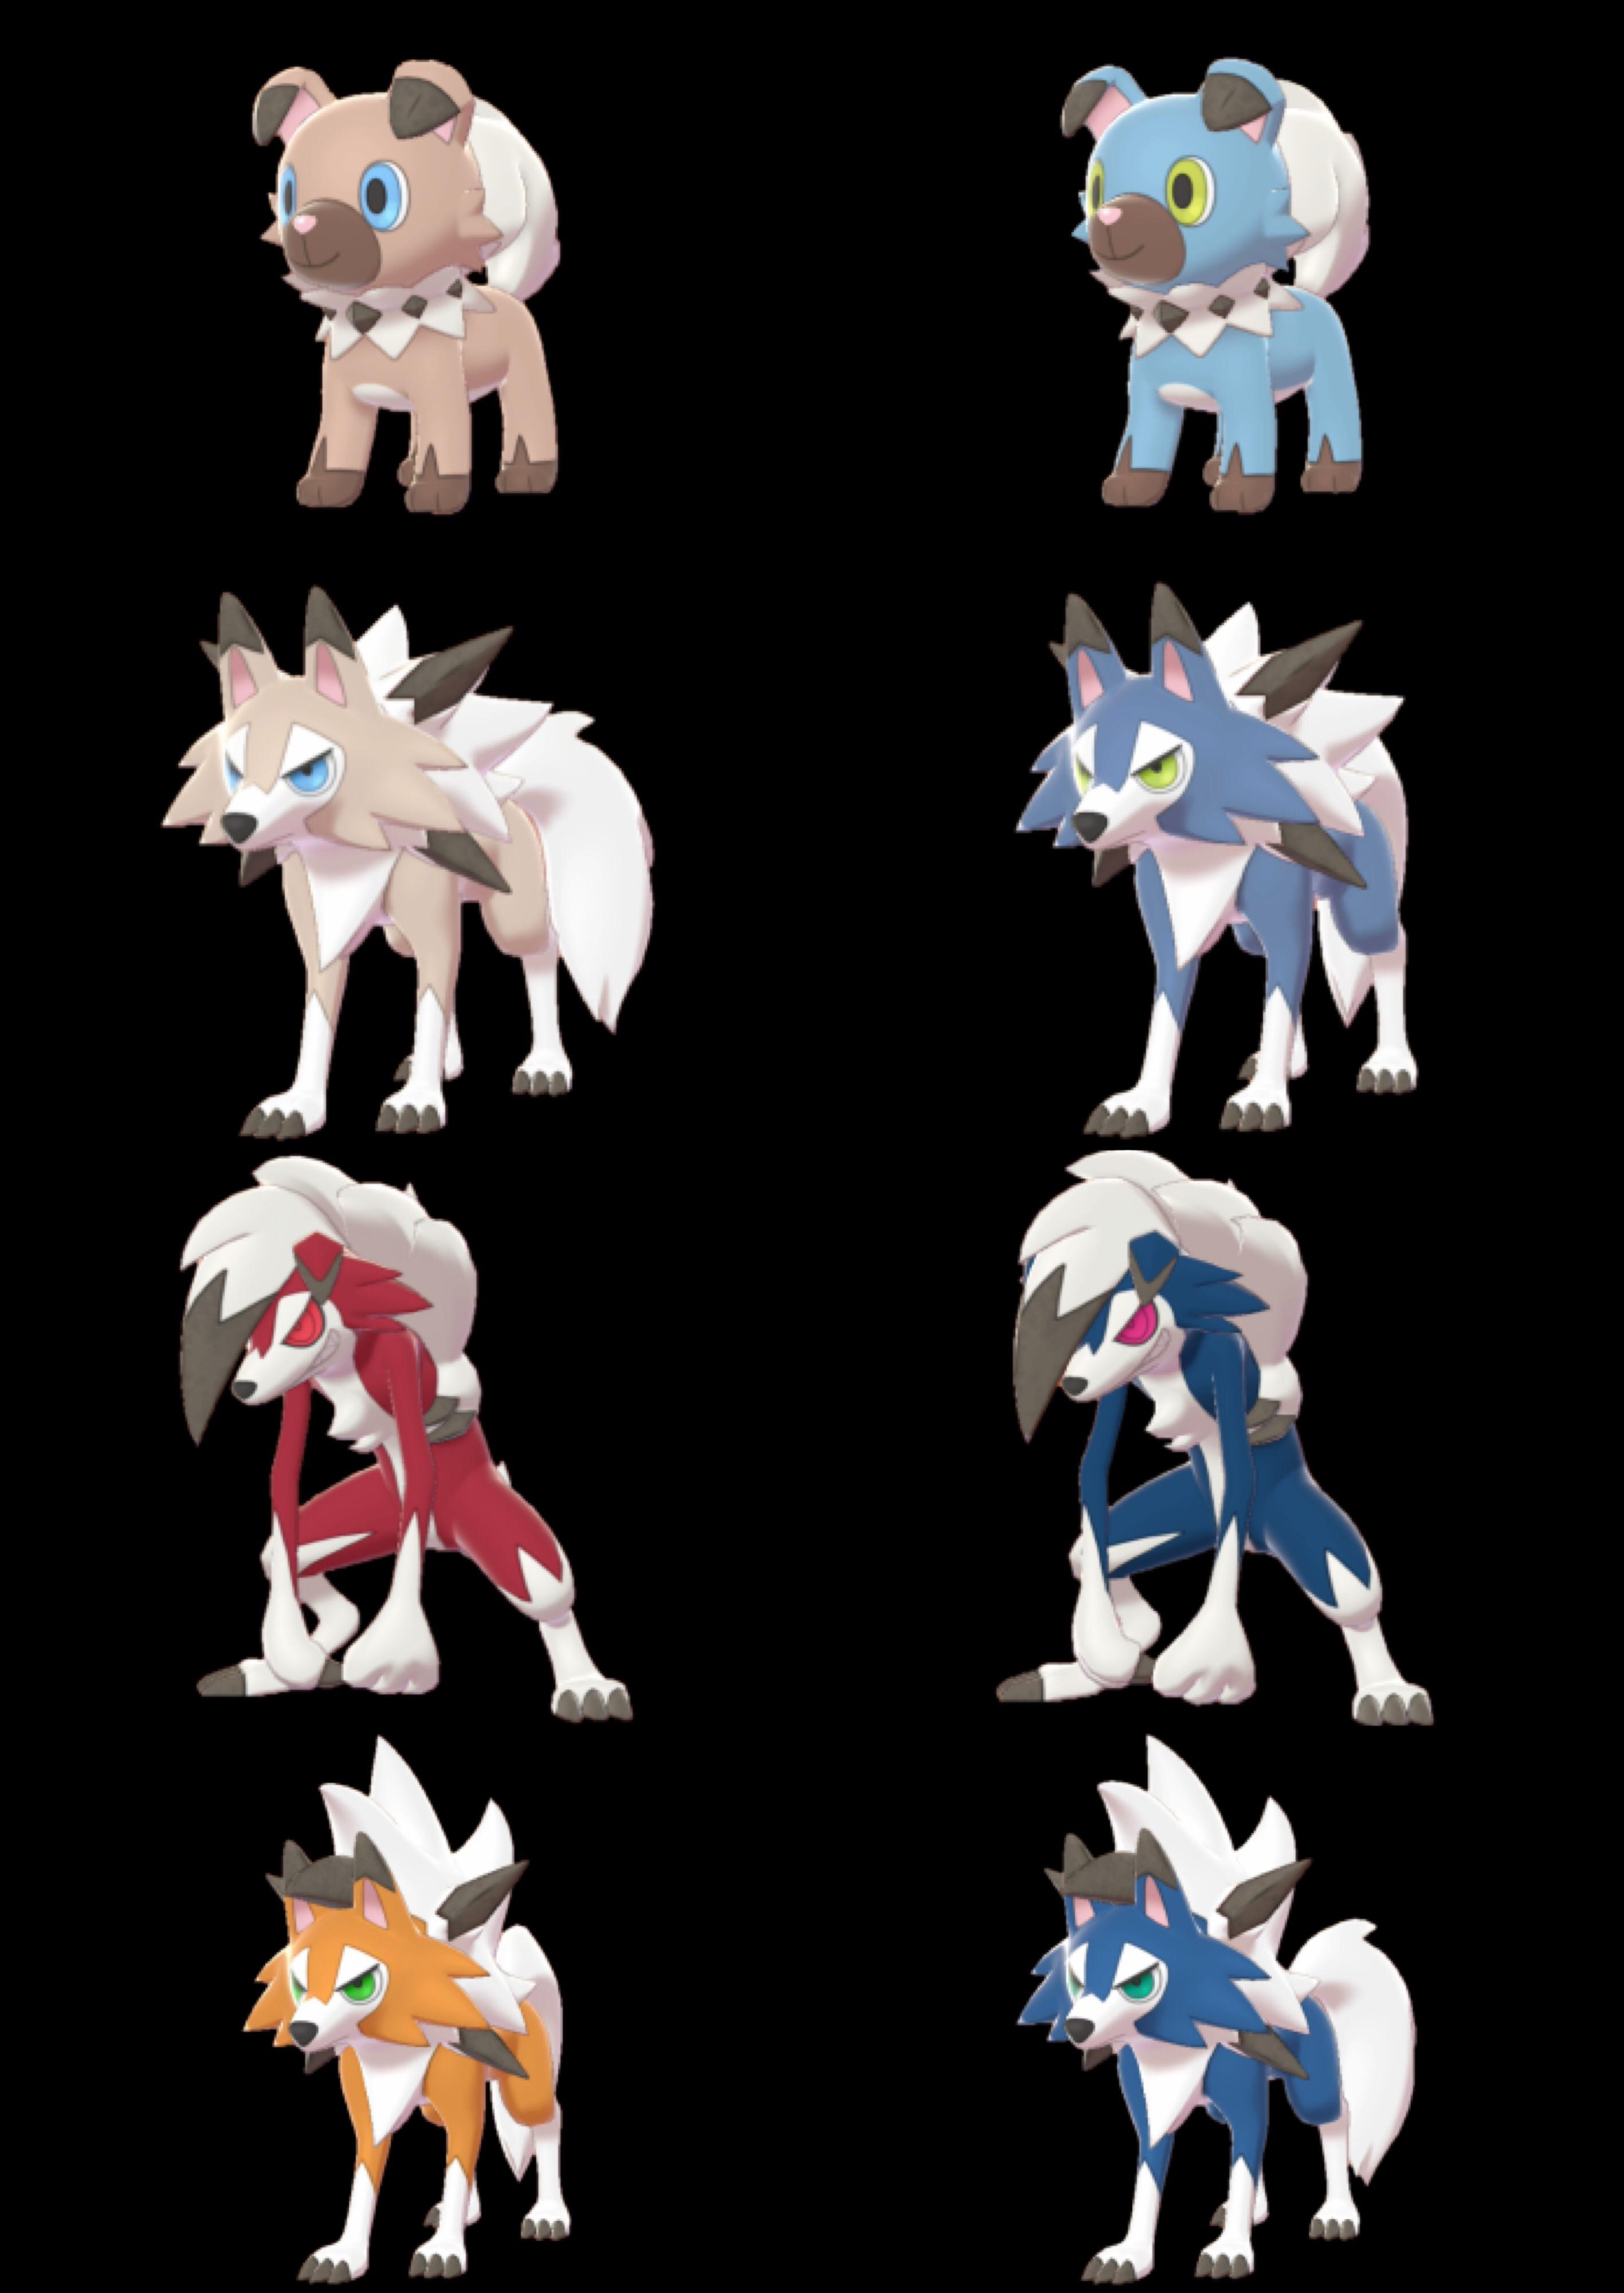 How To Get Rockruff And Lycanroc Midday And Midnight Forms In Pok mon 